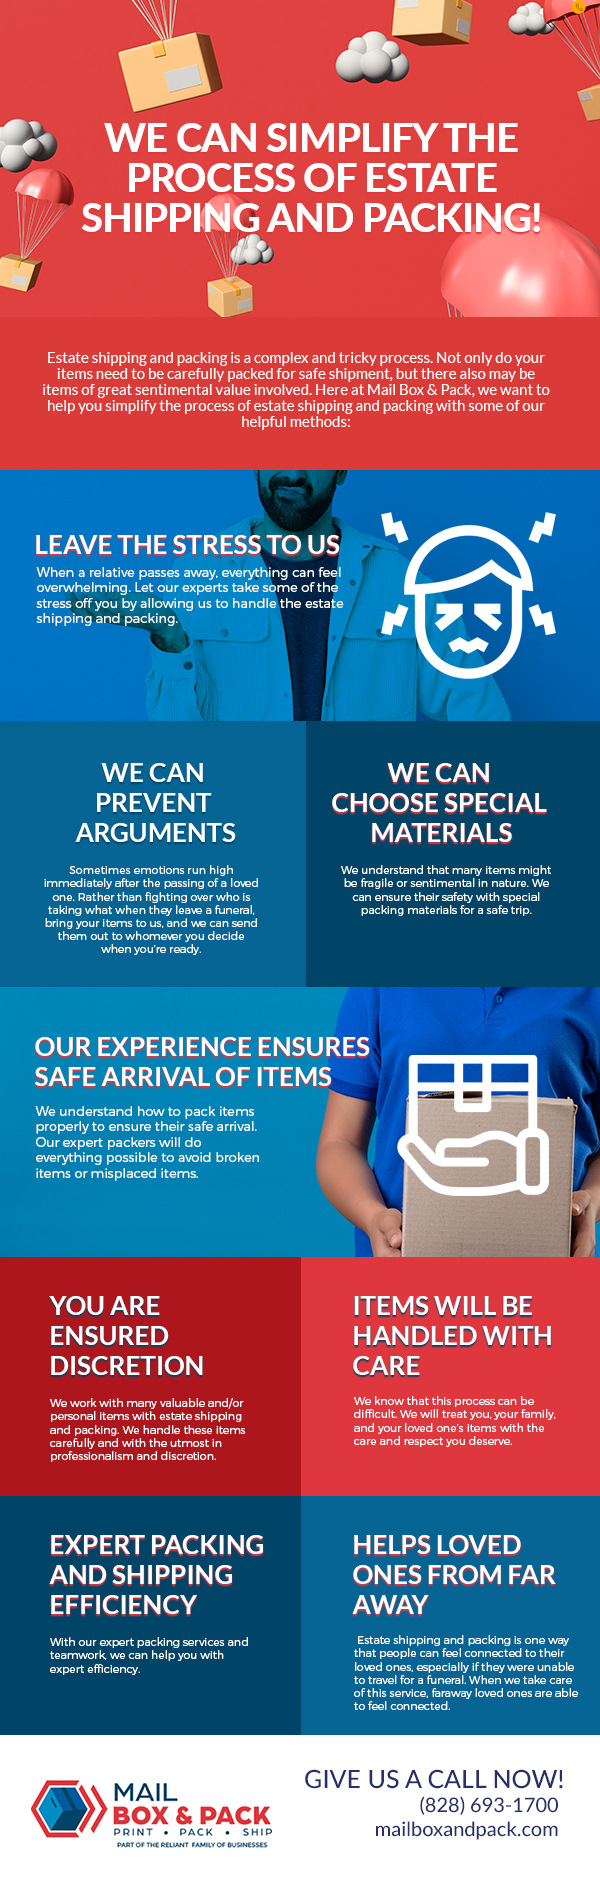 We Can Simplify the Process of Estate Shipping and Packing! [infographic]